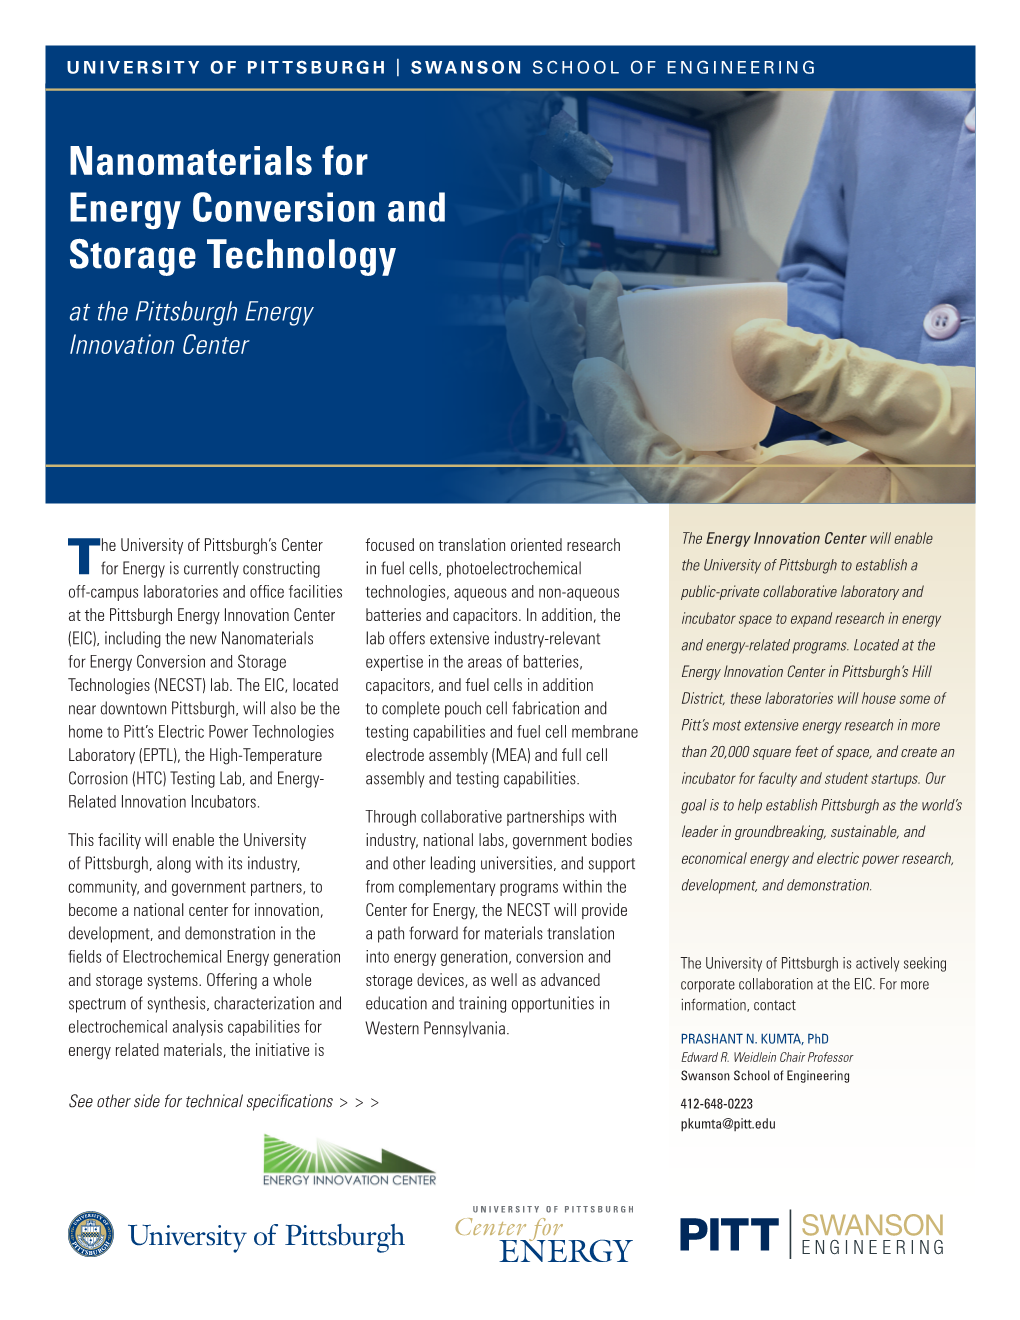 Nanomaterials for Energy Conversion and Storage Technology at the Pittsburgh Energy Innovation Center